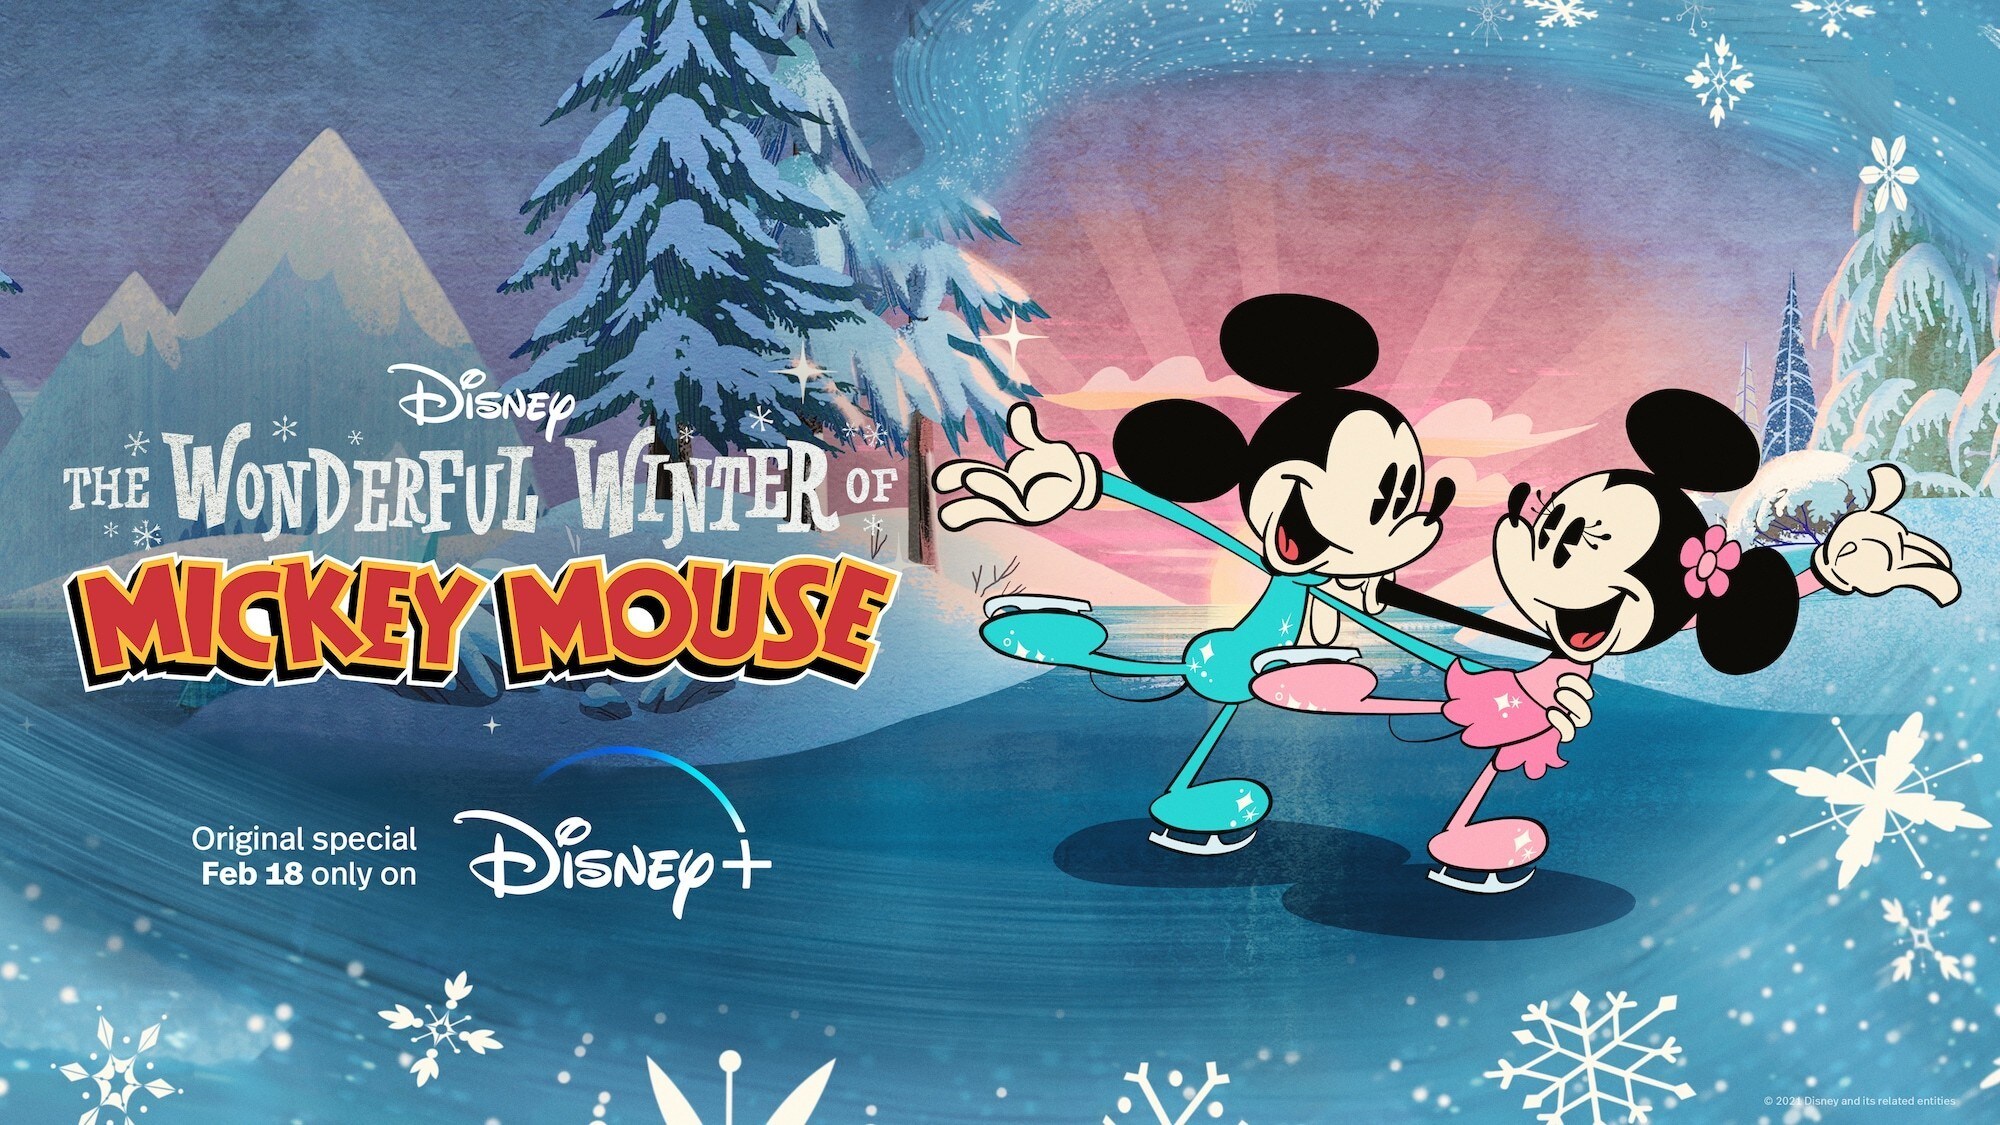 DISNEY+ DEBUTS TRAILER AND KEY ART FOR “THE WONDERFUL WINTER OF MICKEY MOUSE”